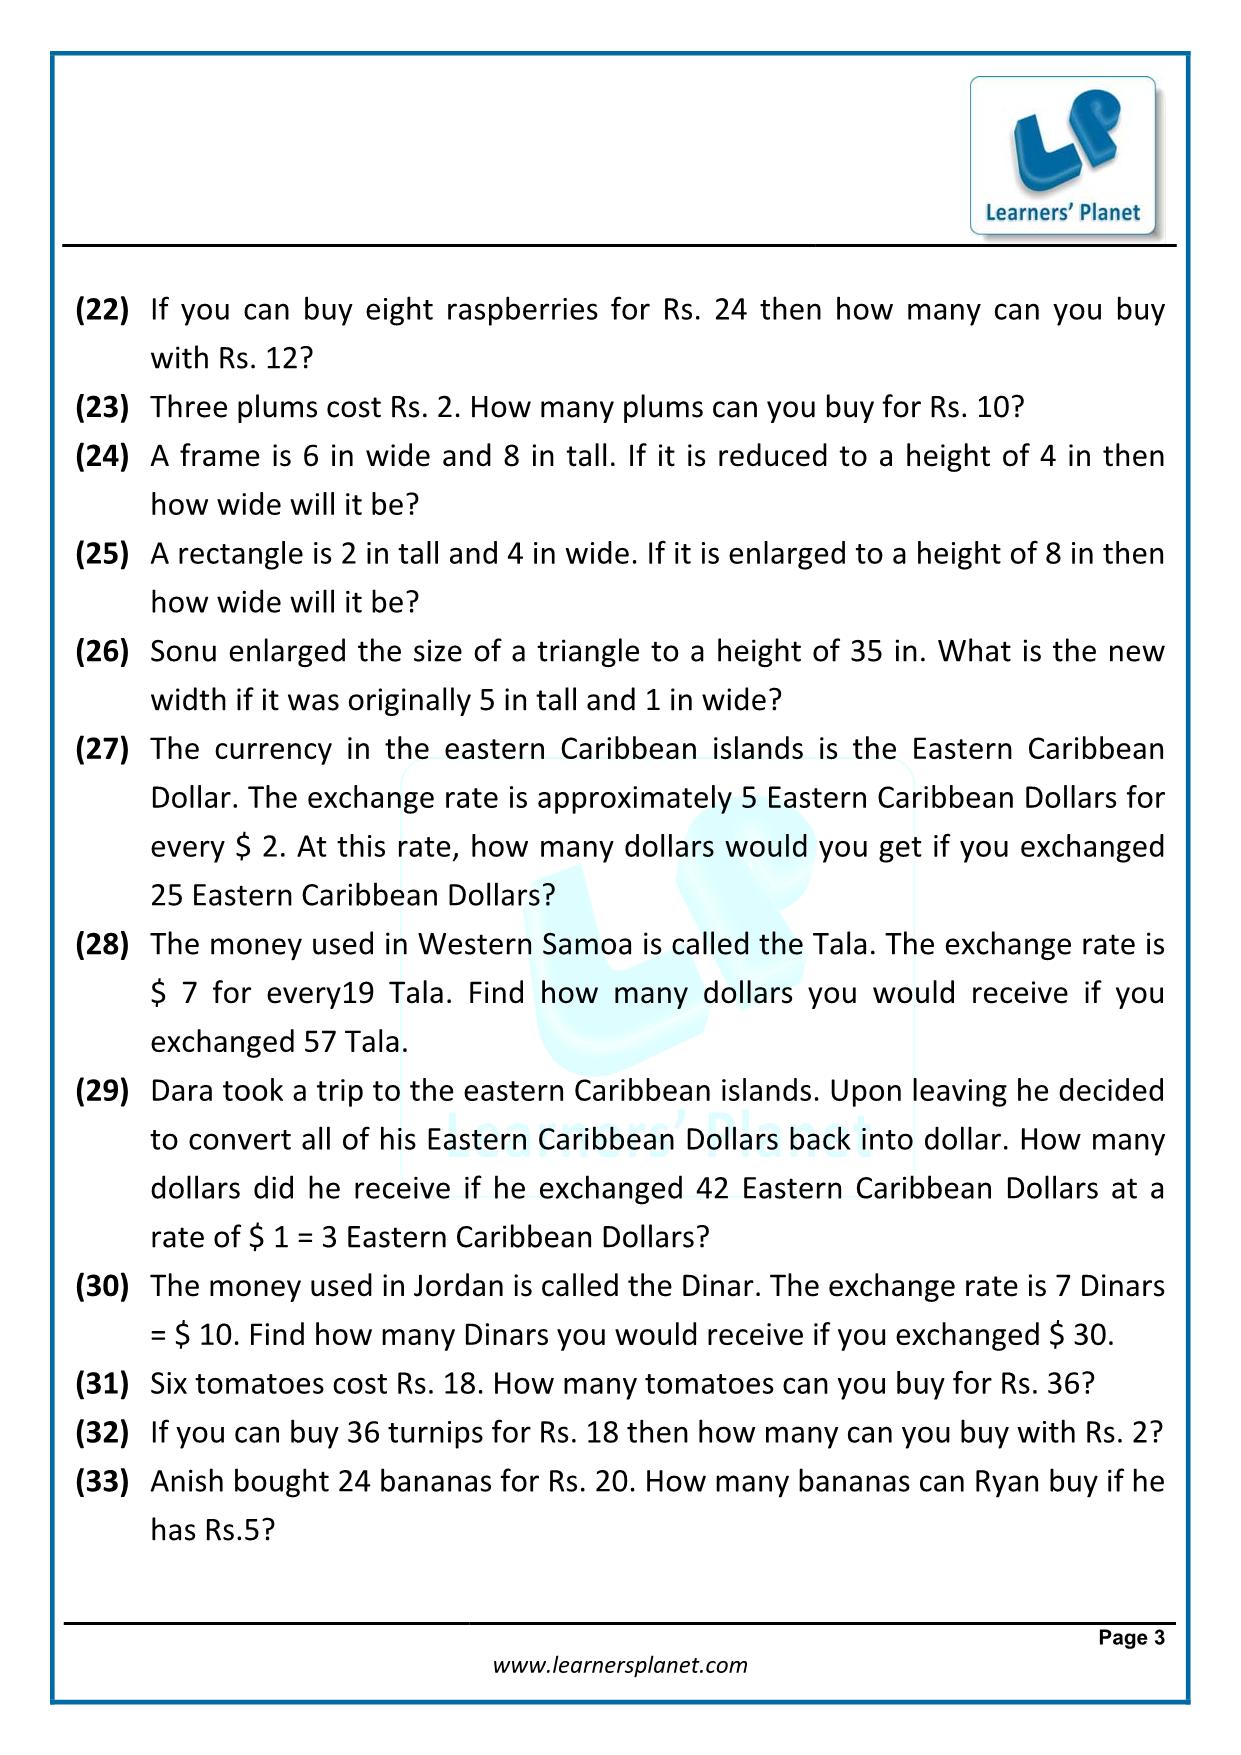 linear-equations-for-class-7-cbse-worksheets-tessshebaylo